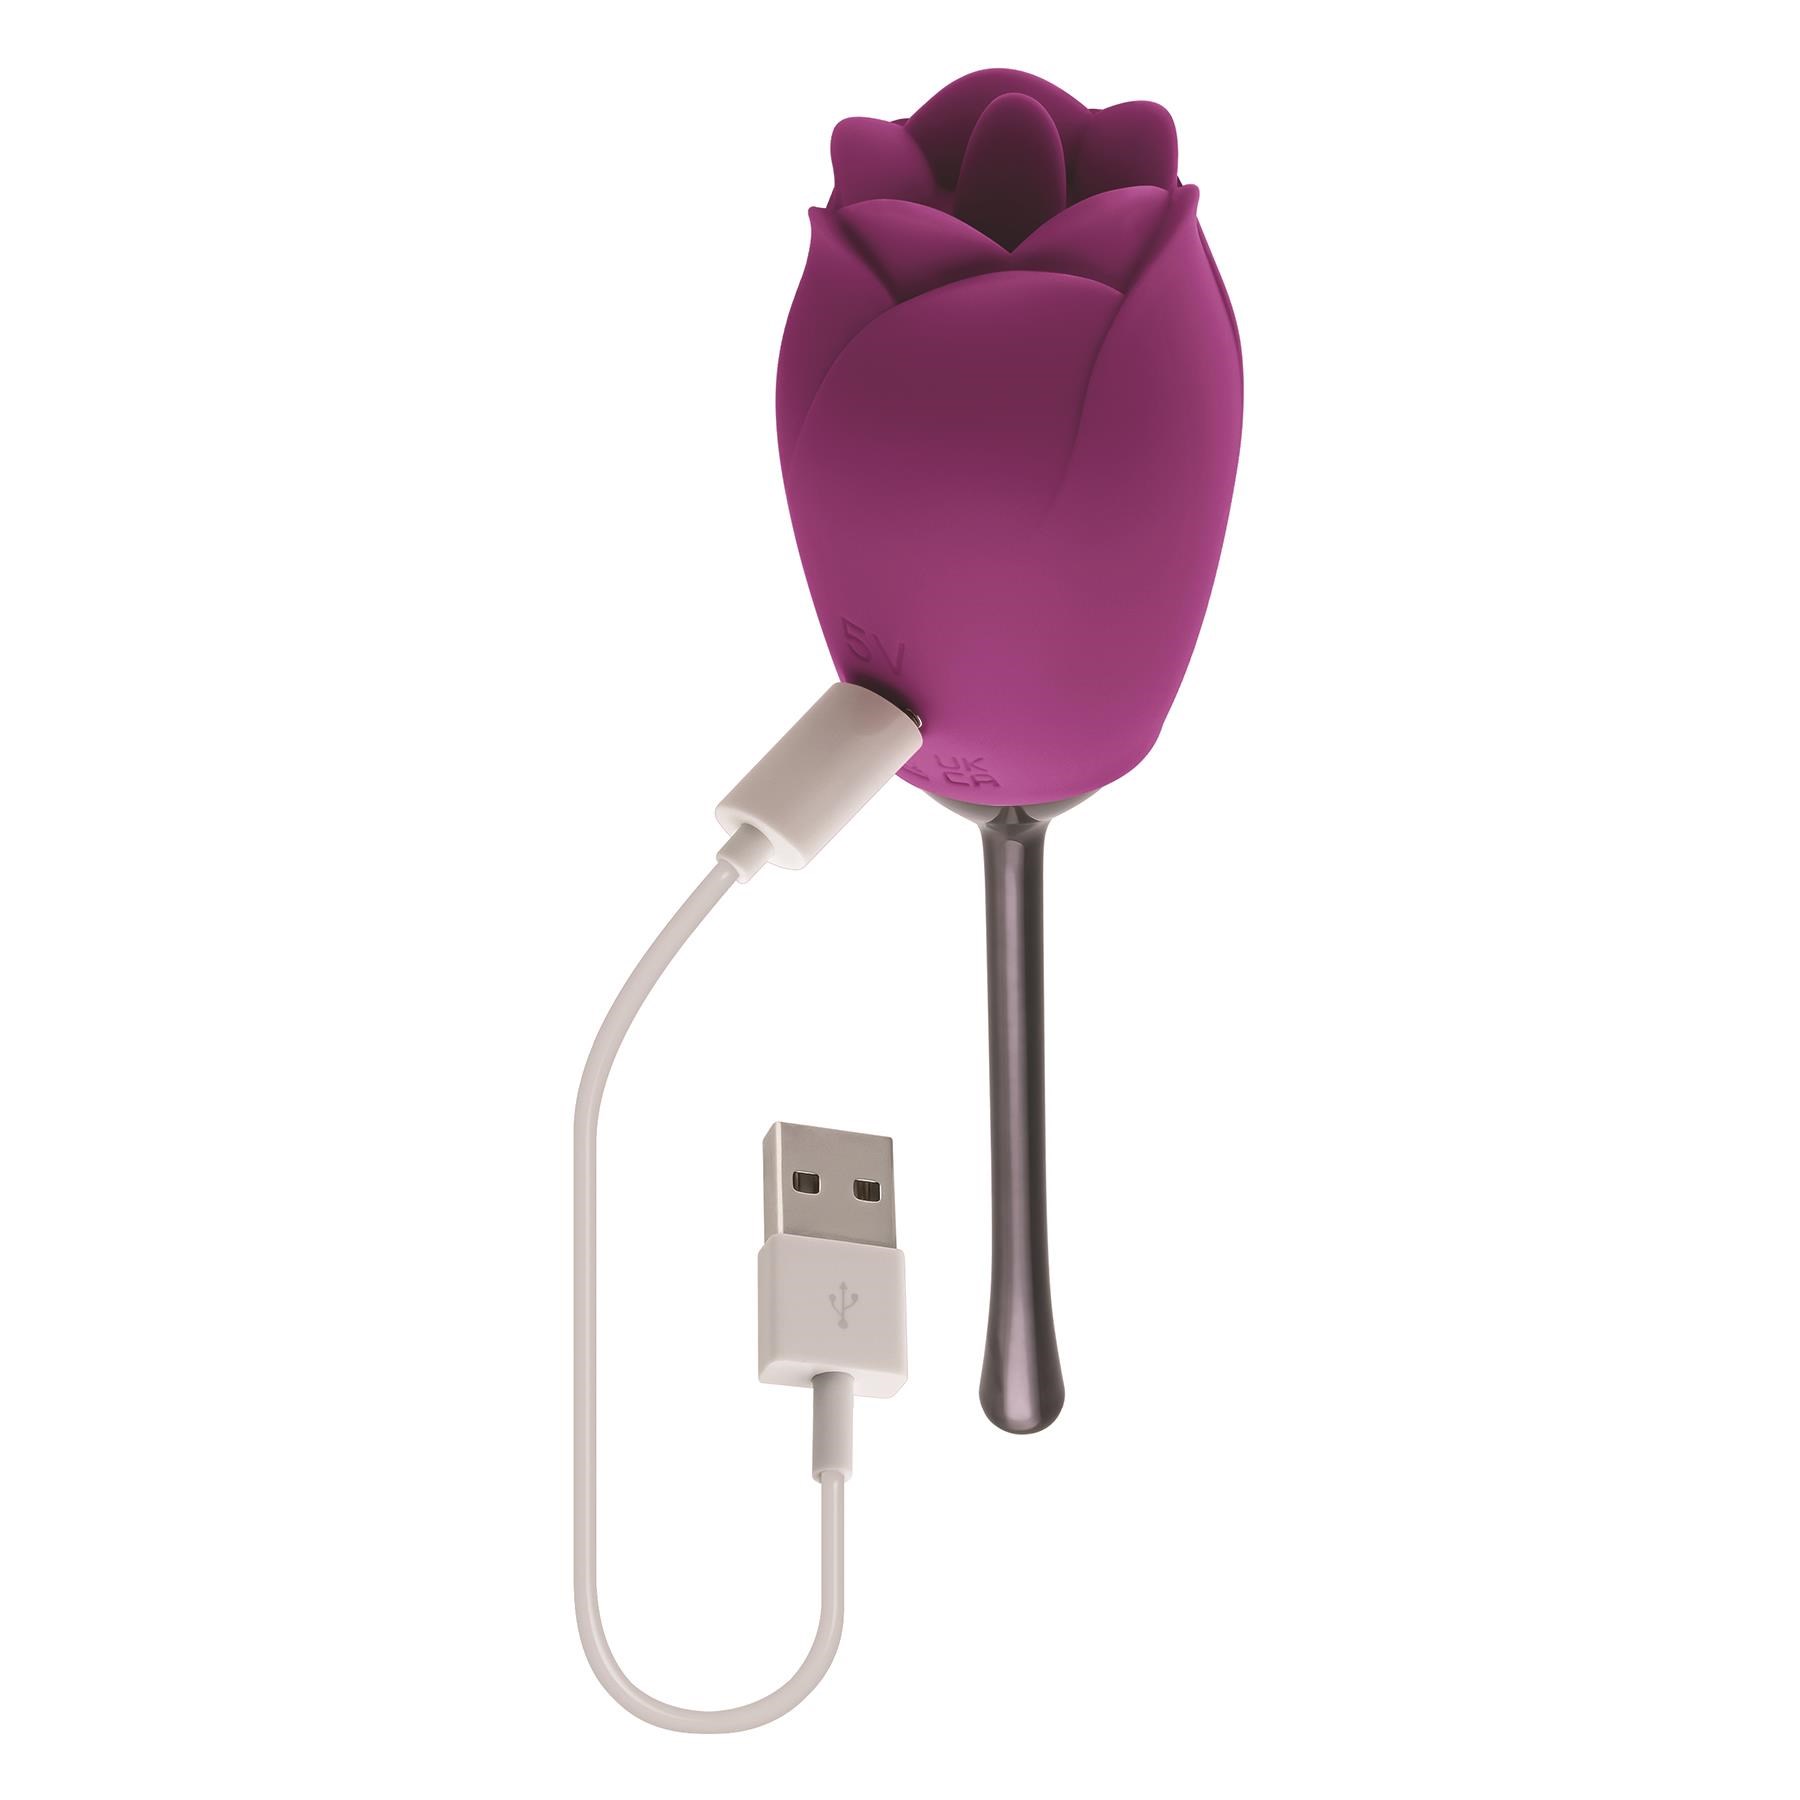 Playboy Pleasure Petal Rose Clitoral Stimulator - Showing Where Charging Cable is Placed